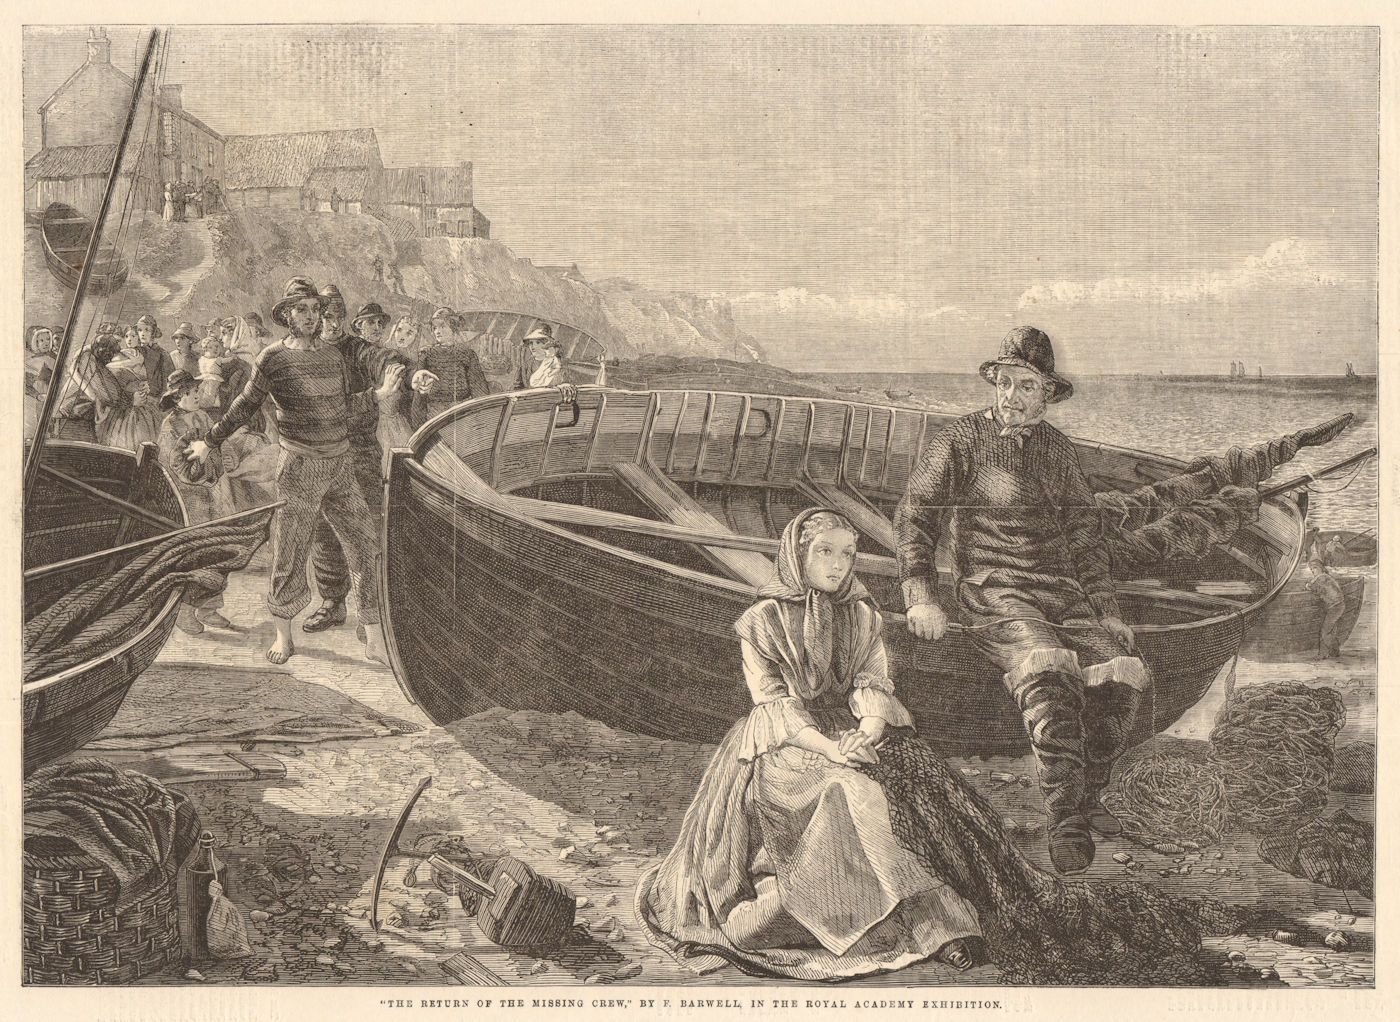 Associate Product The return of the missing crew by F. Barwell. Fishermen. Ships 1860 old print